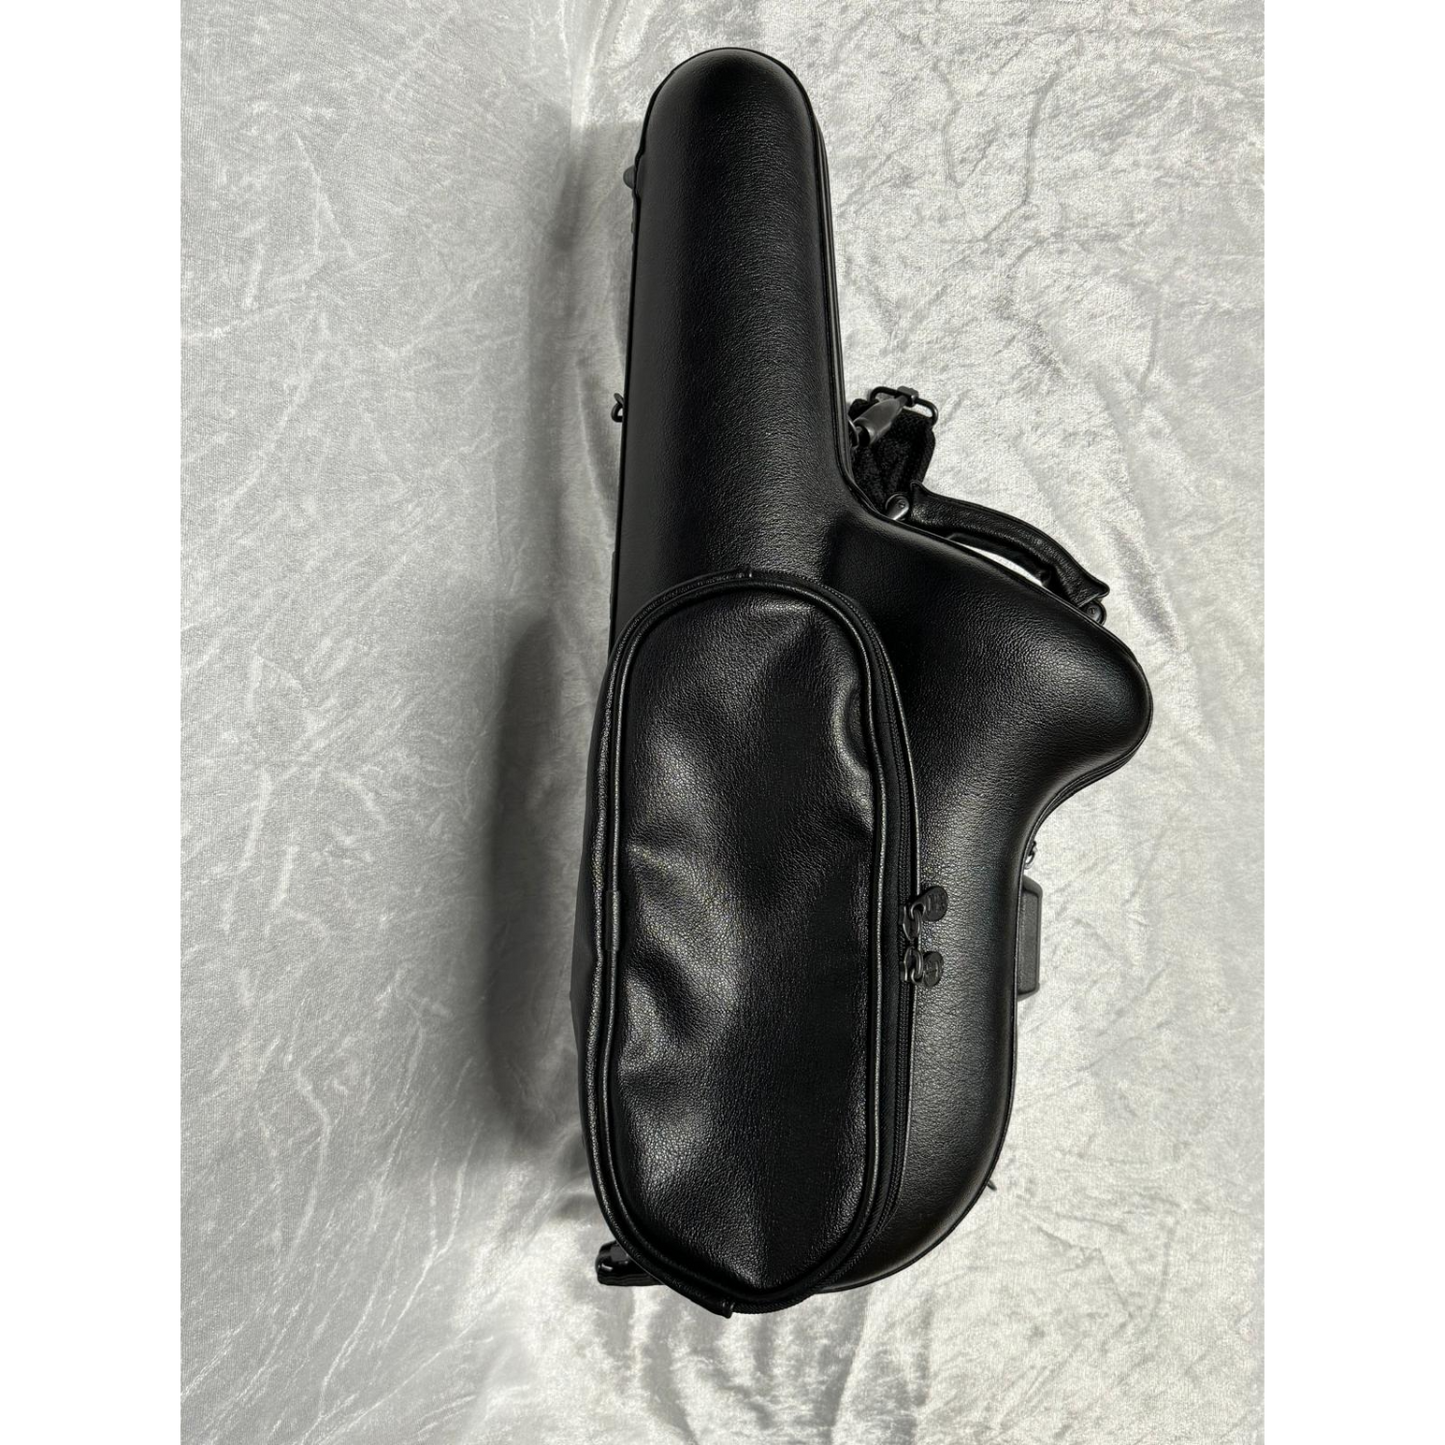 black leather case, closed, showing accessory pouch on the outside, against white velvet background